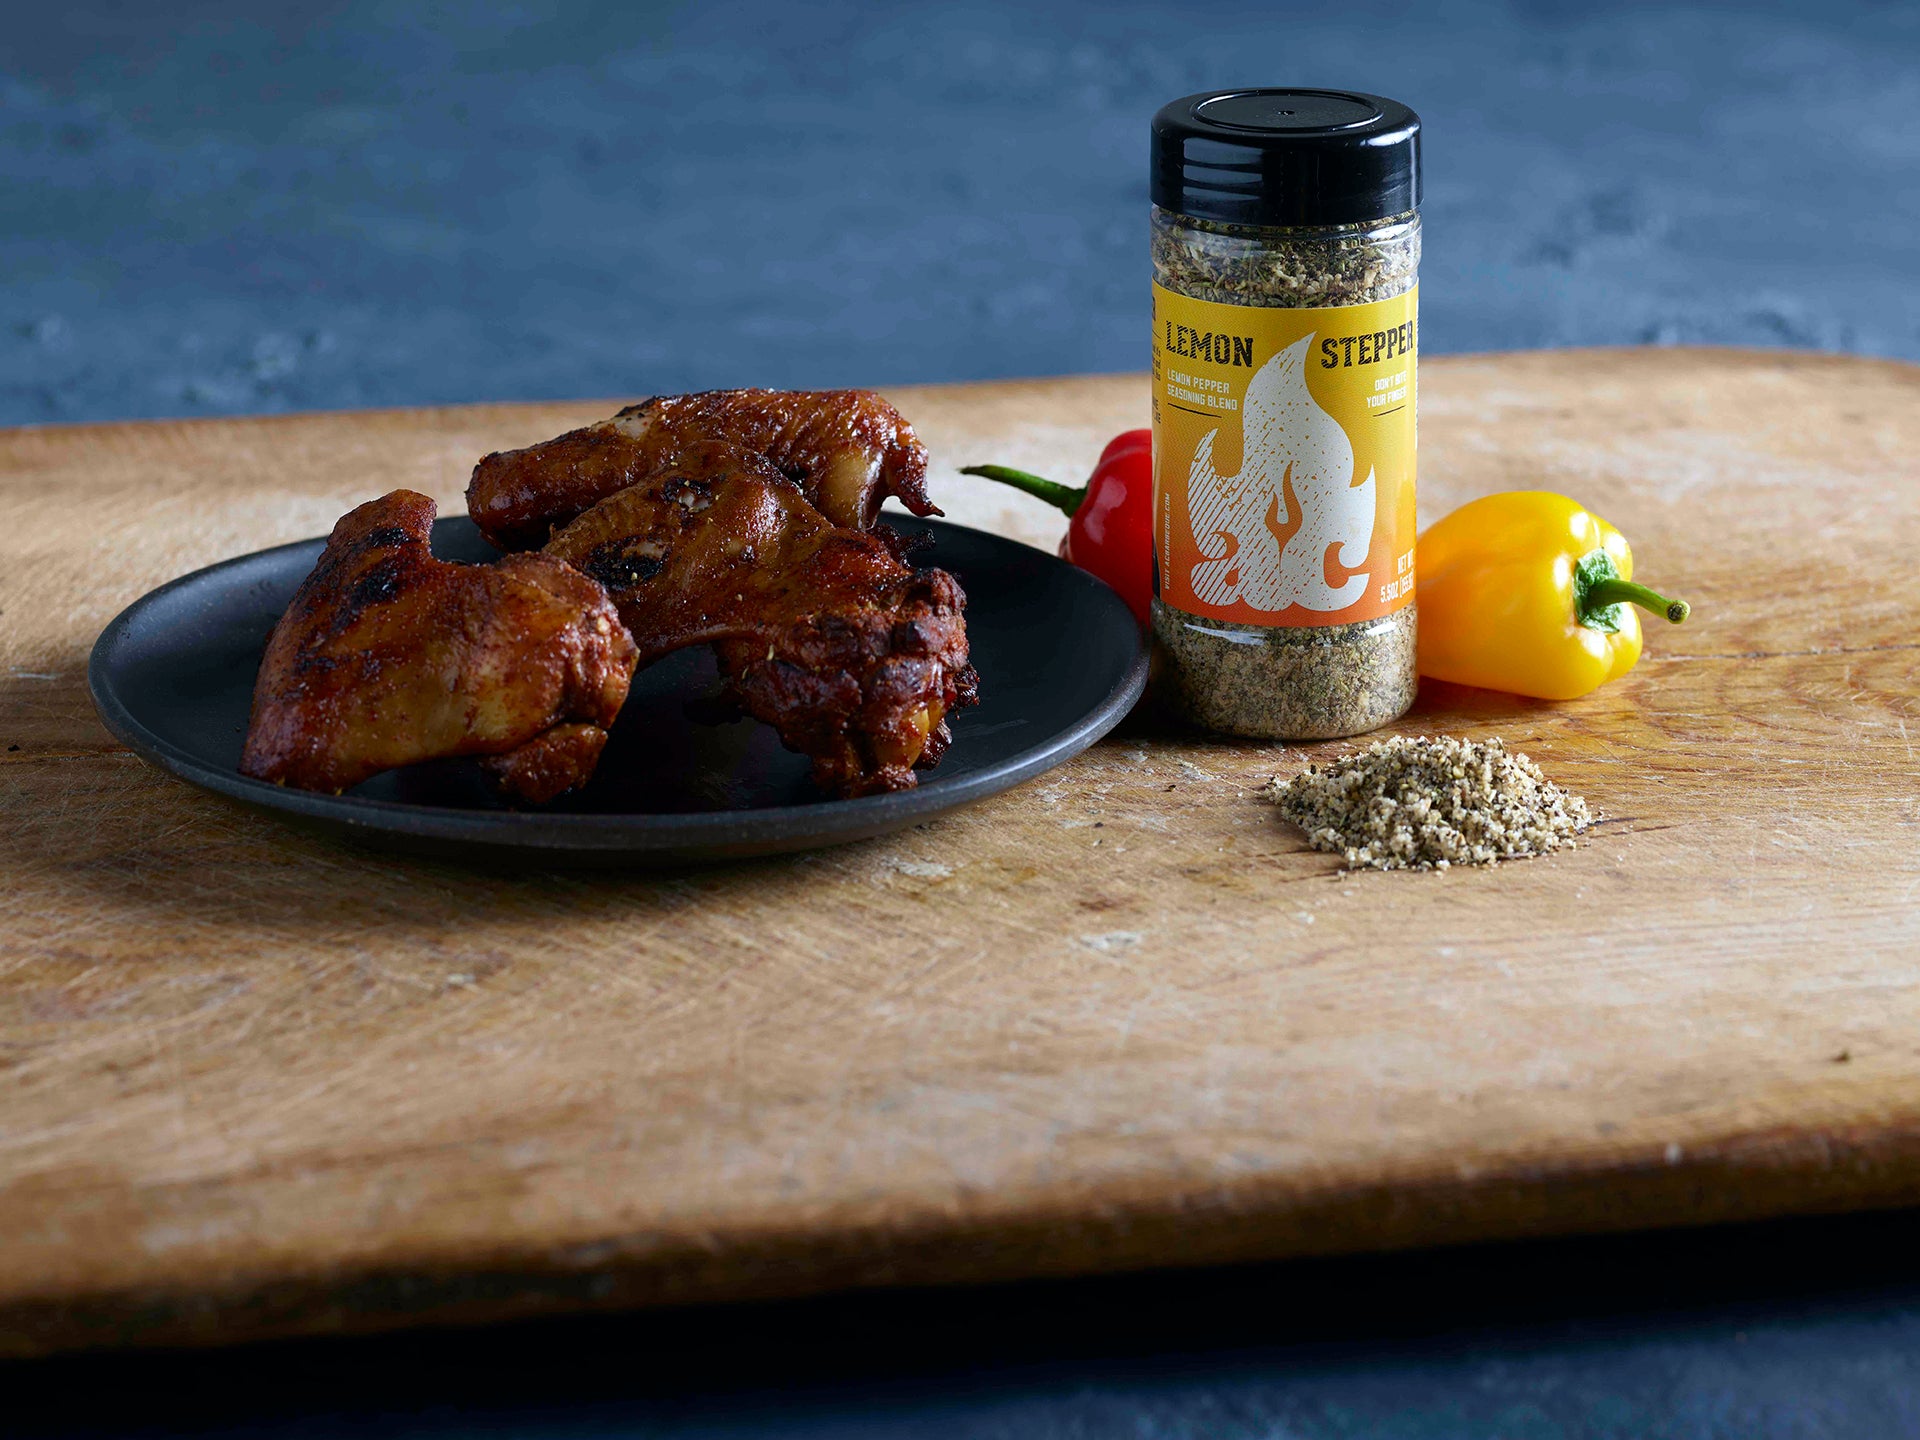 Lemon Stepper Seasoning Rub by AC Barbeque next to a plate with seasoned and cooked chicken